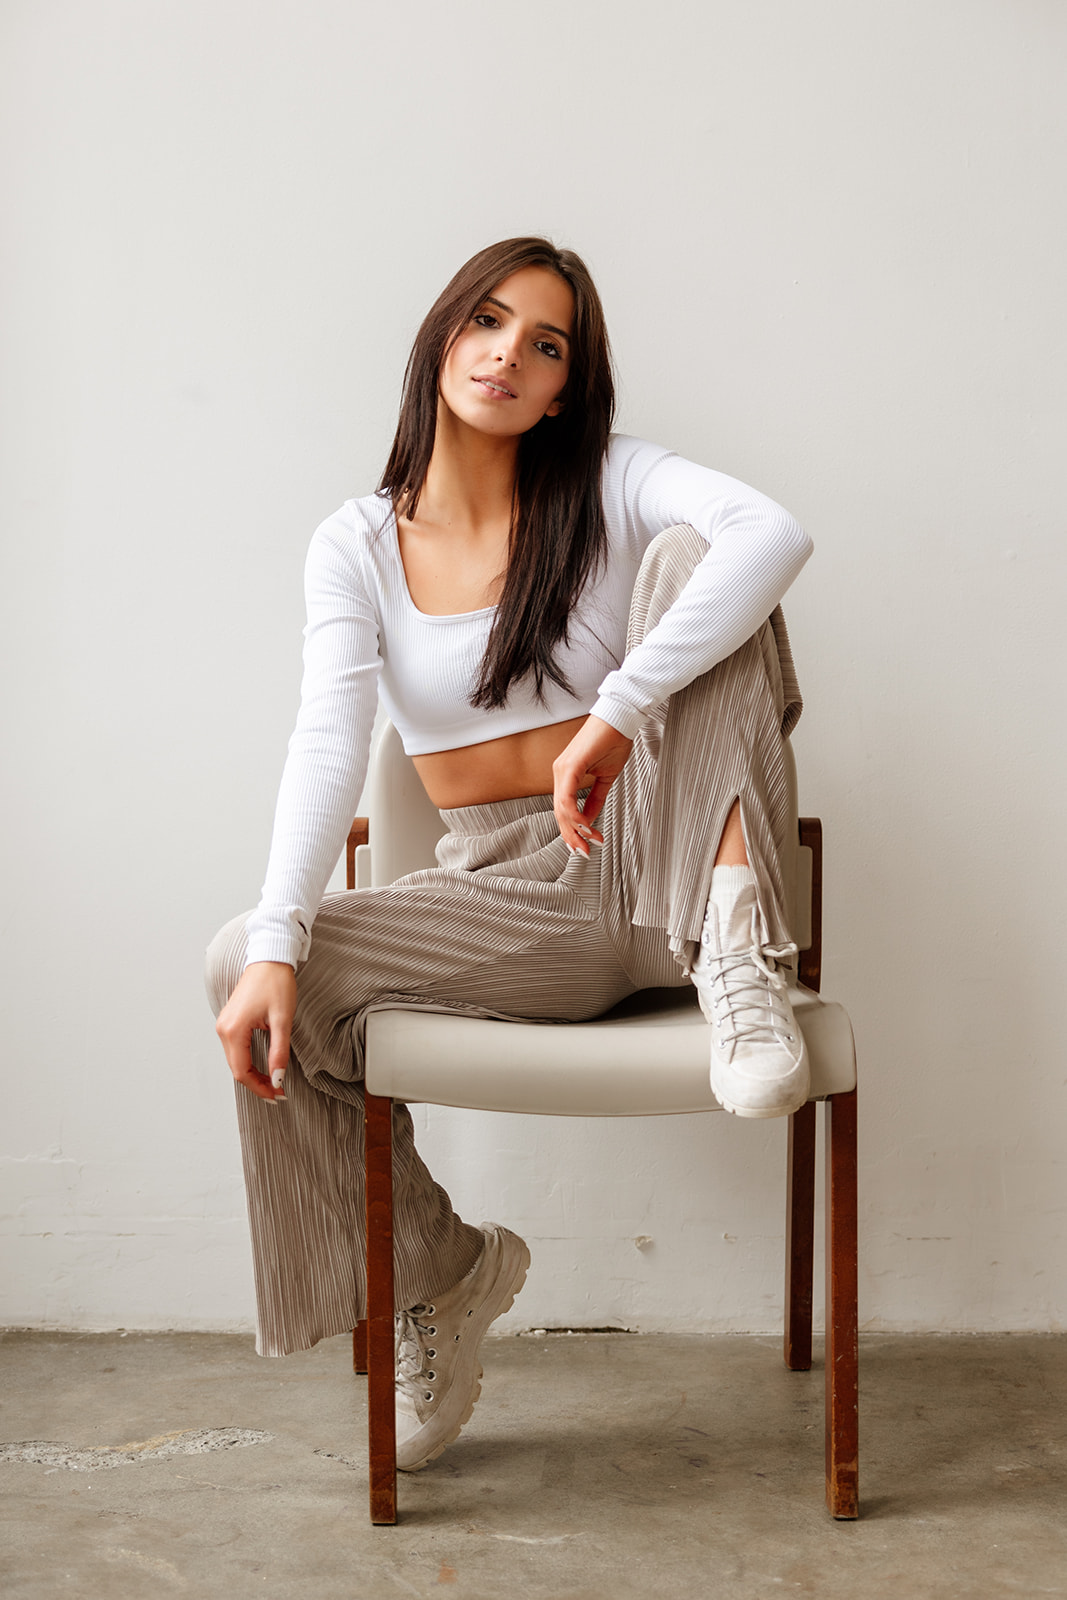 Fashionable portrait of a teen girl sitting in front of a white backdrop inside a Seattle natural light photo studio.